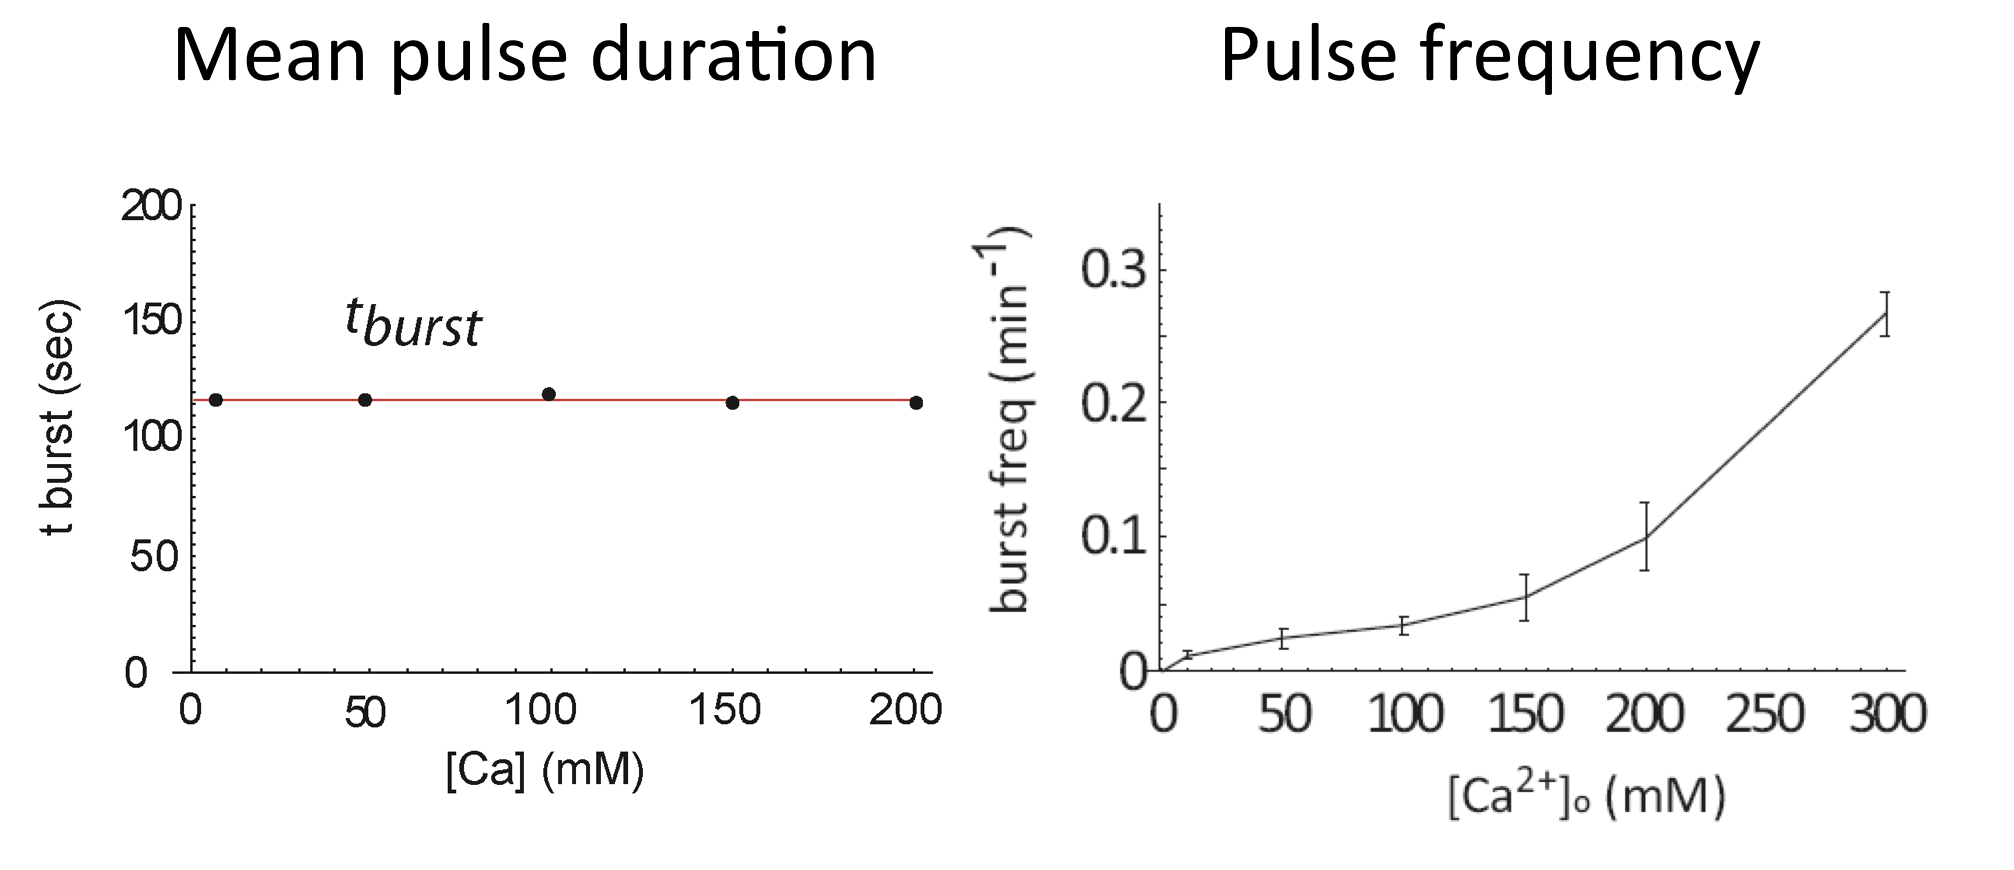 Crz1_pulse_duration_frequency